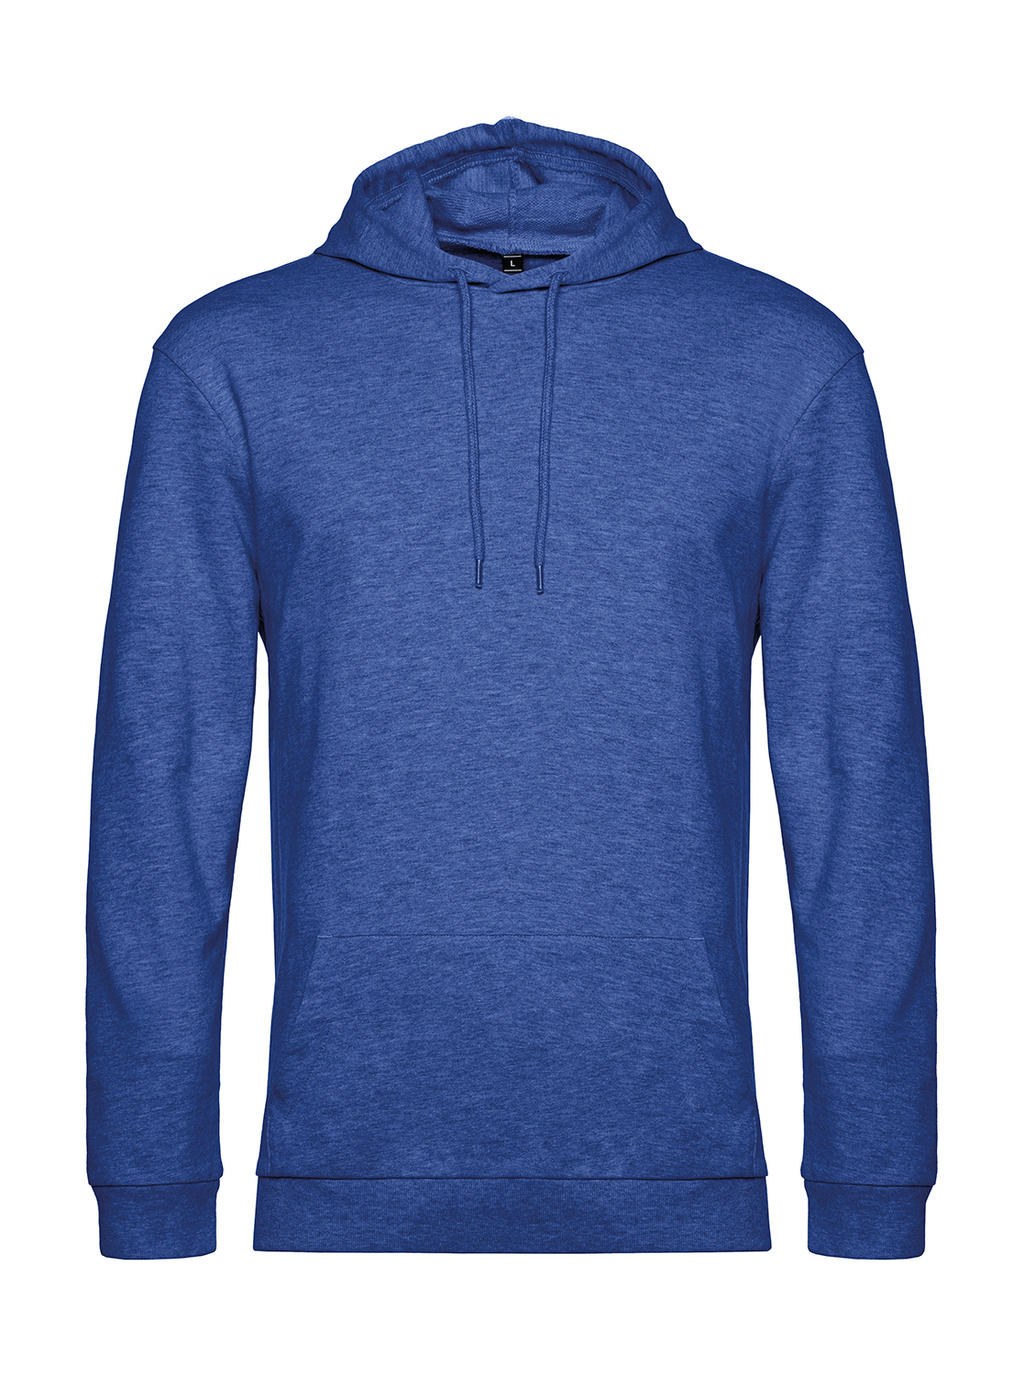 Mikina s kapucňou #Hoodie French Terry - heather royal blue